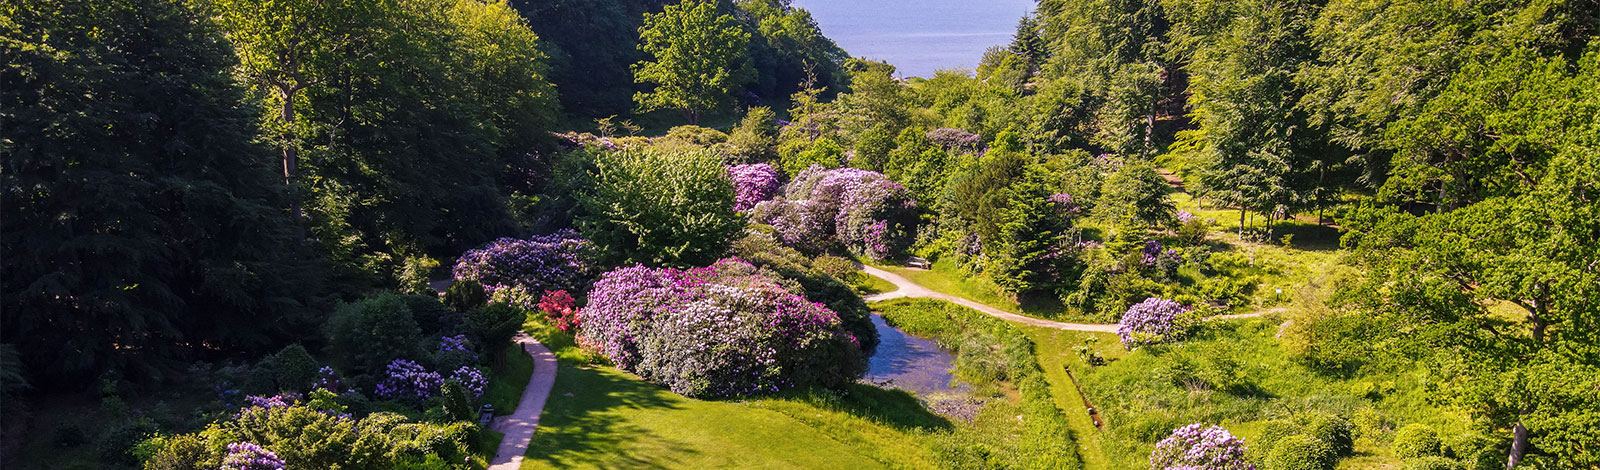 Great beautiful rhodododendron adorns the park in the spring and early summer